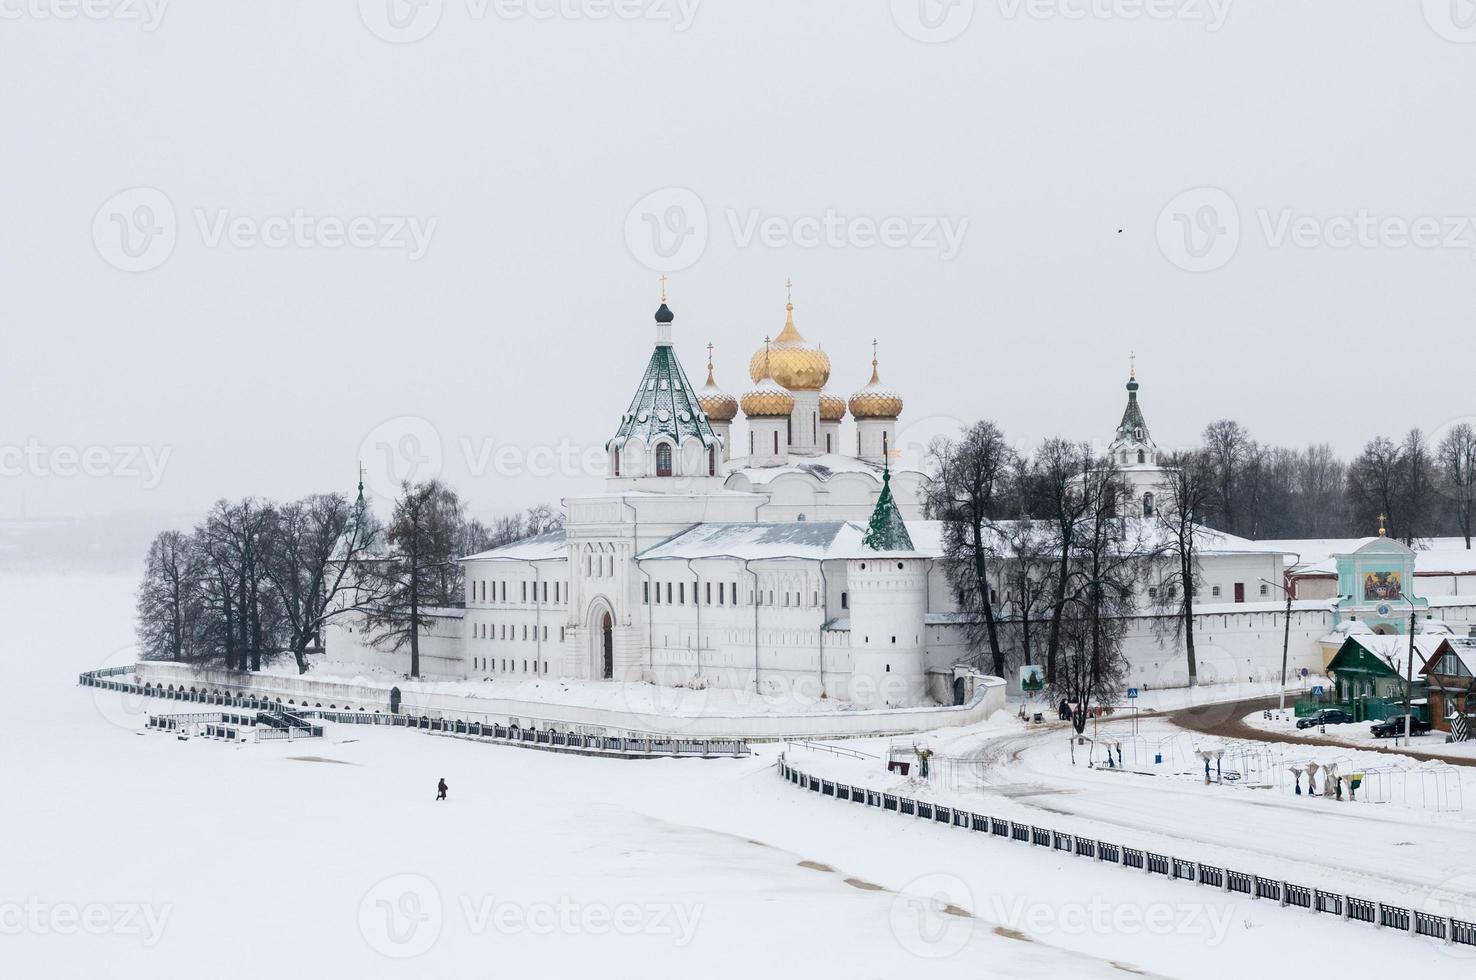 The Ipatiev Monastery, a male monastery, situated on the bank of the Kostroma River just opposite the city of Kostroma, Russia in the winter. photo